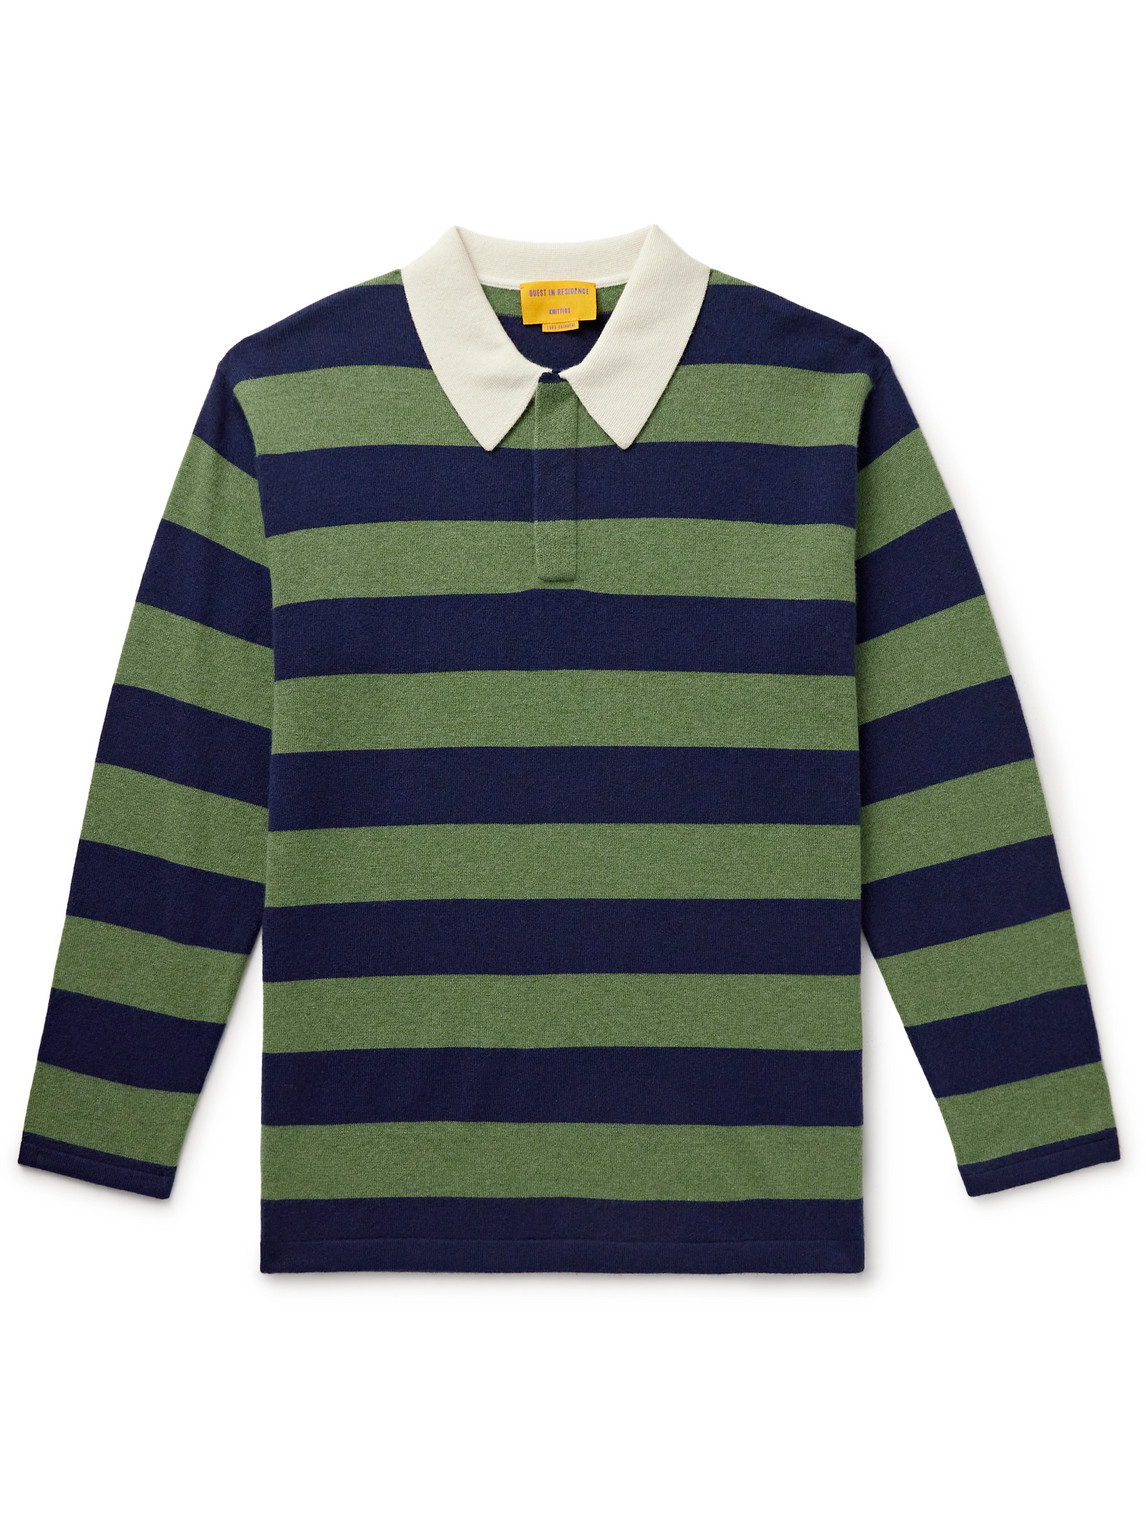 Guest In Residence - Rugby Striped Cashmere Polo Shirt - Men - Green - XL von Guest In Residence